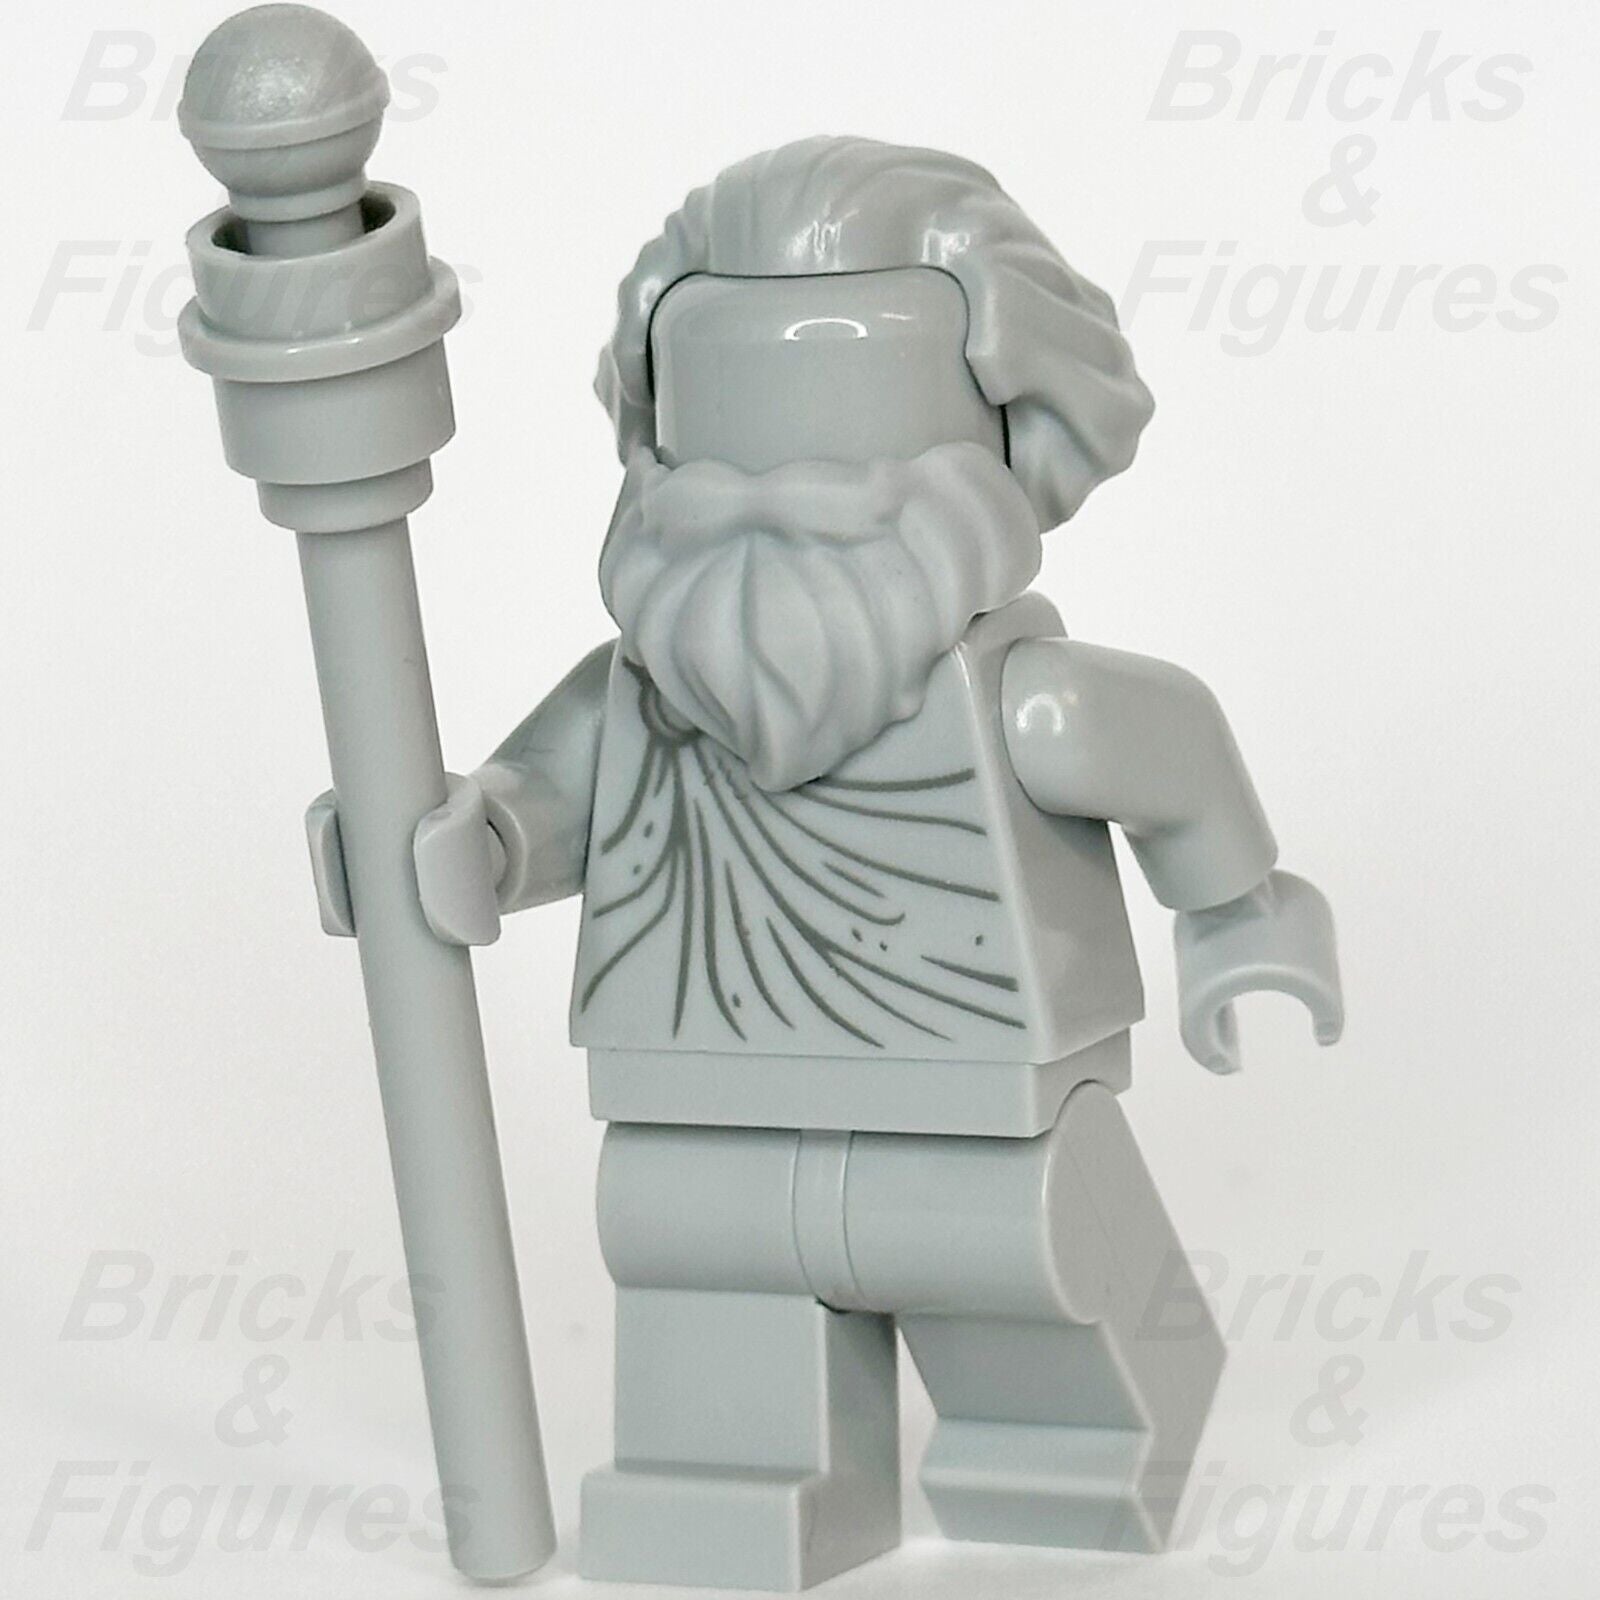 LEGO Creator Natural History Museum Statue Minifigure Town Male 10326 twn486